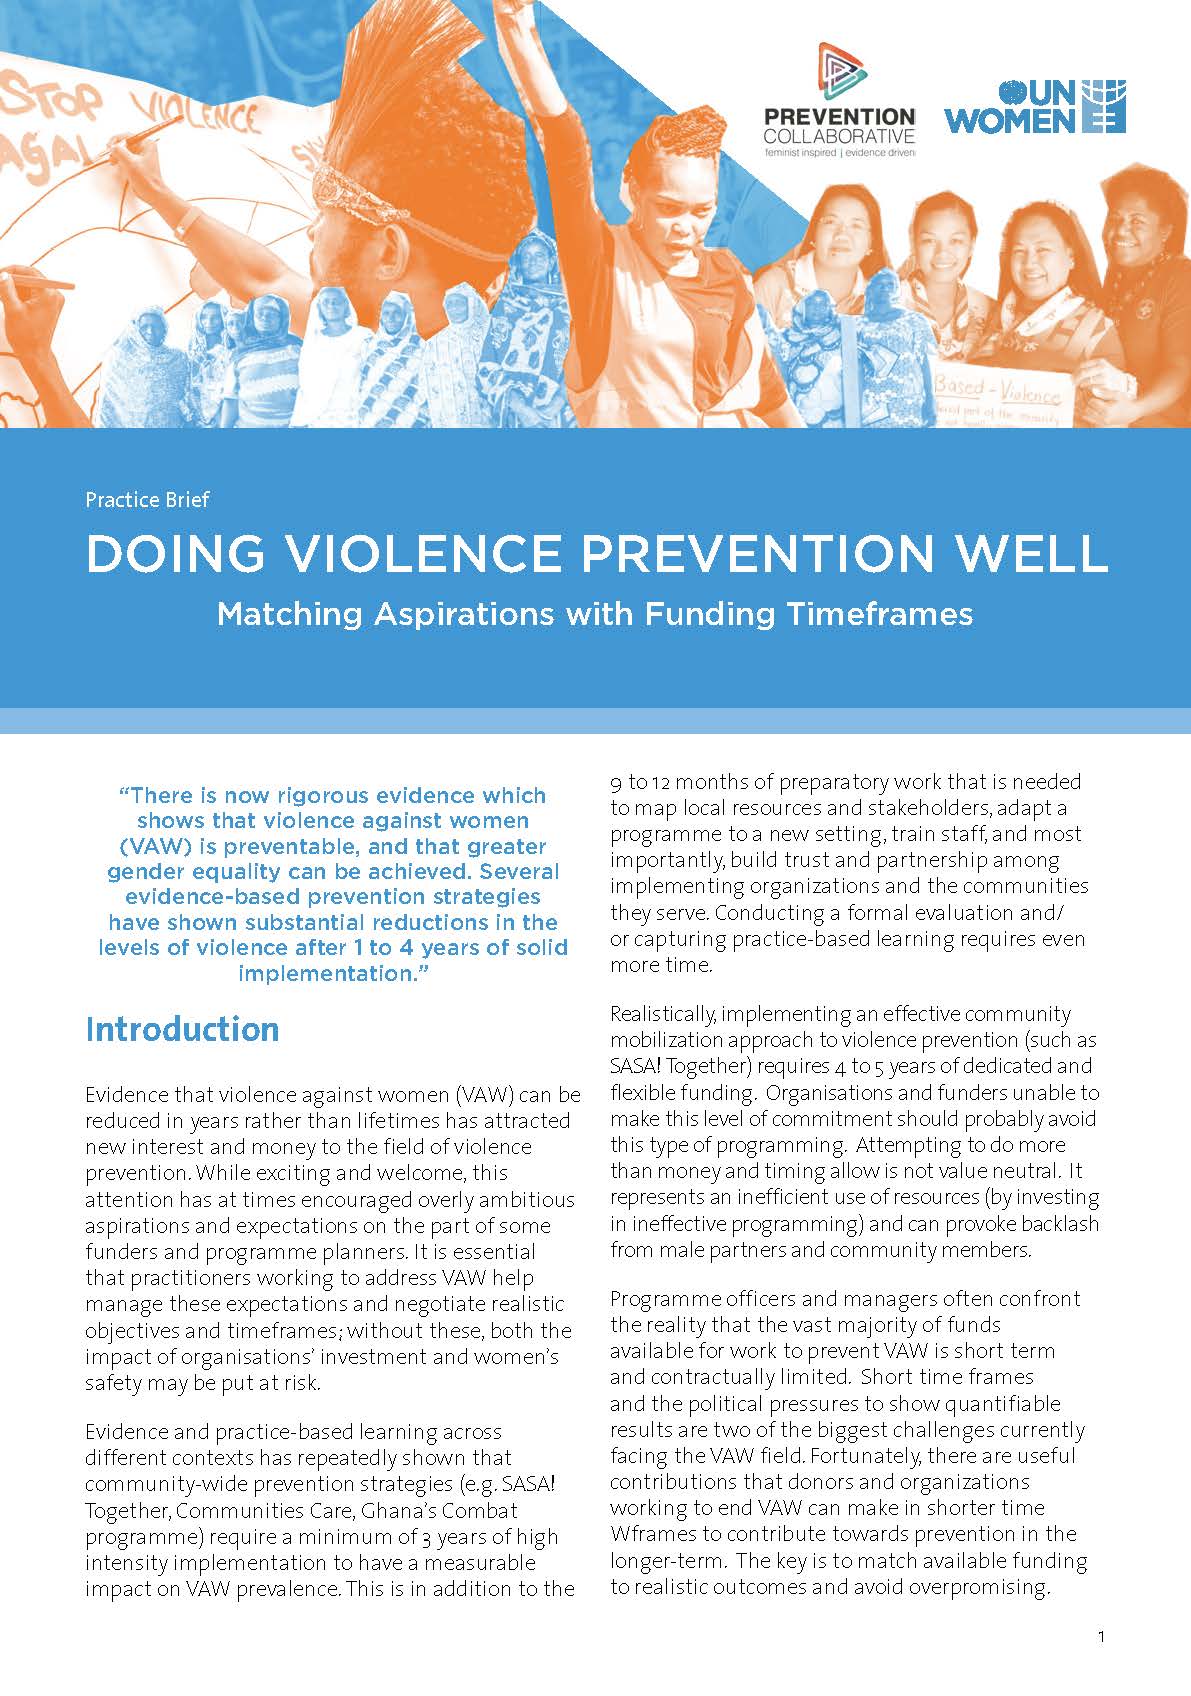 Doing Violence Prevention Well: Matching Aspirations with Funding Timeframes